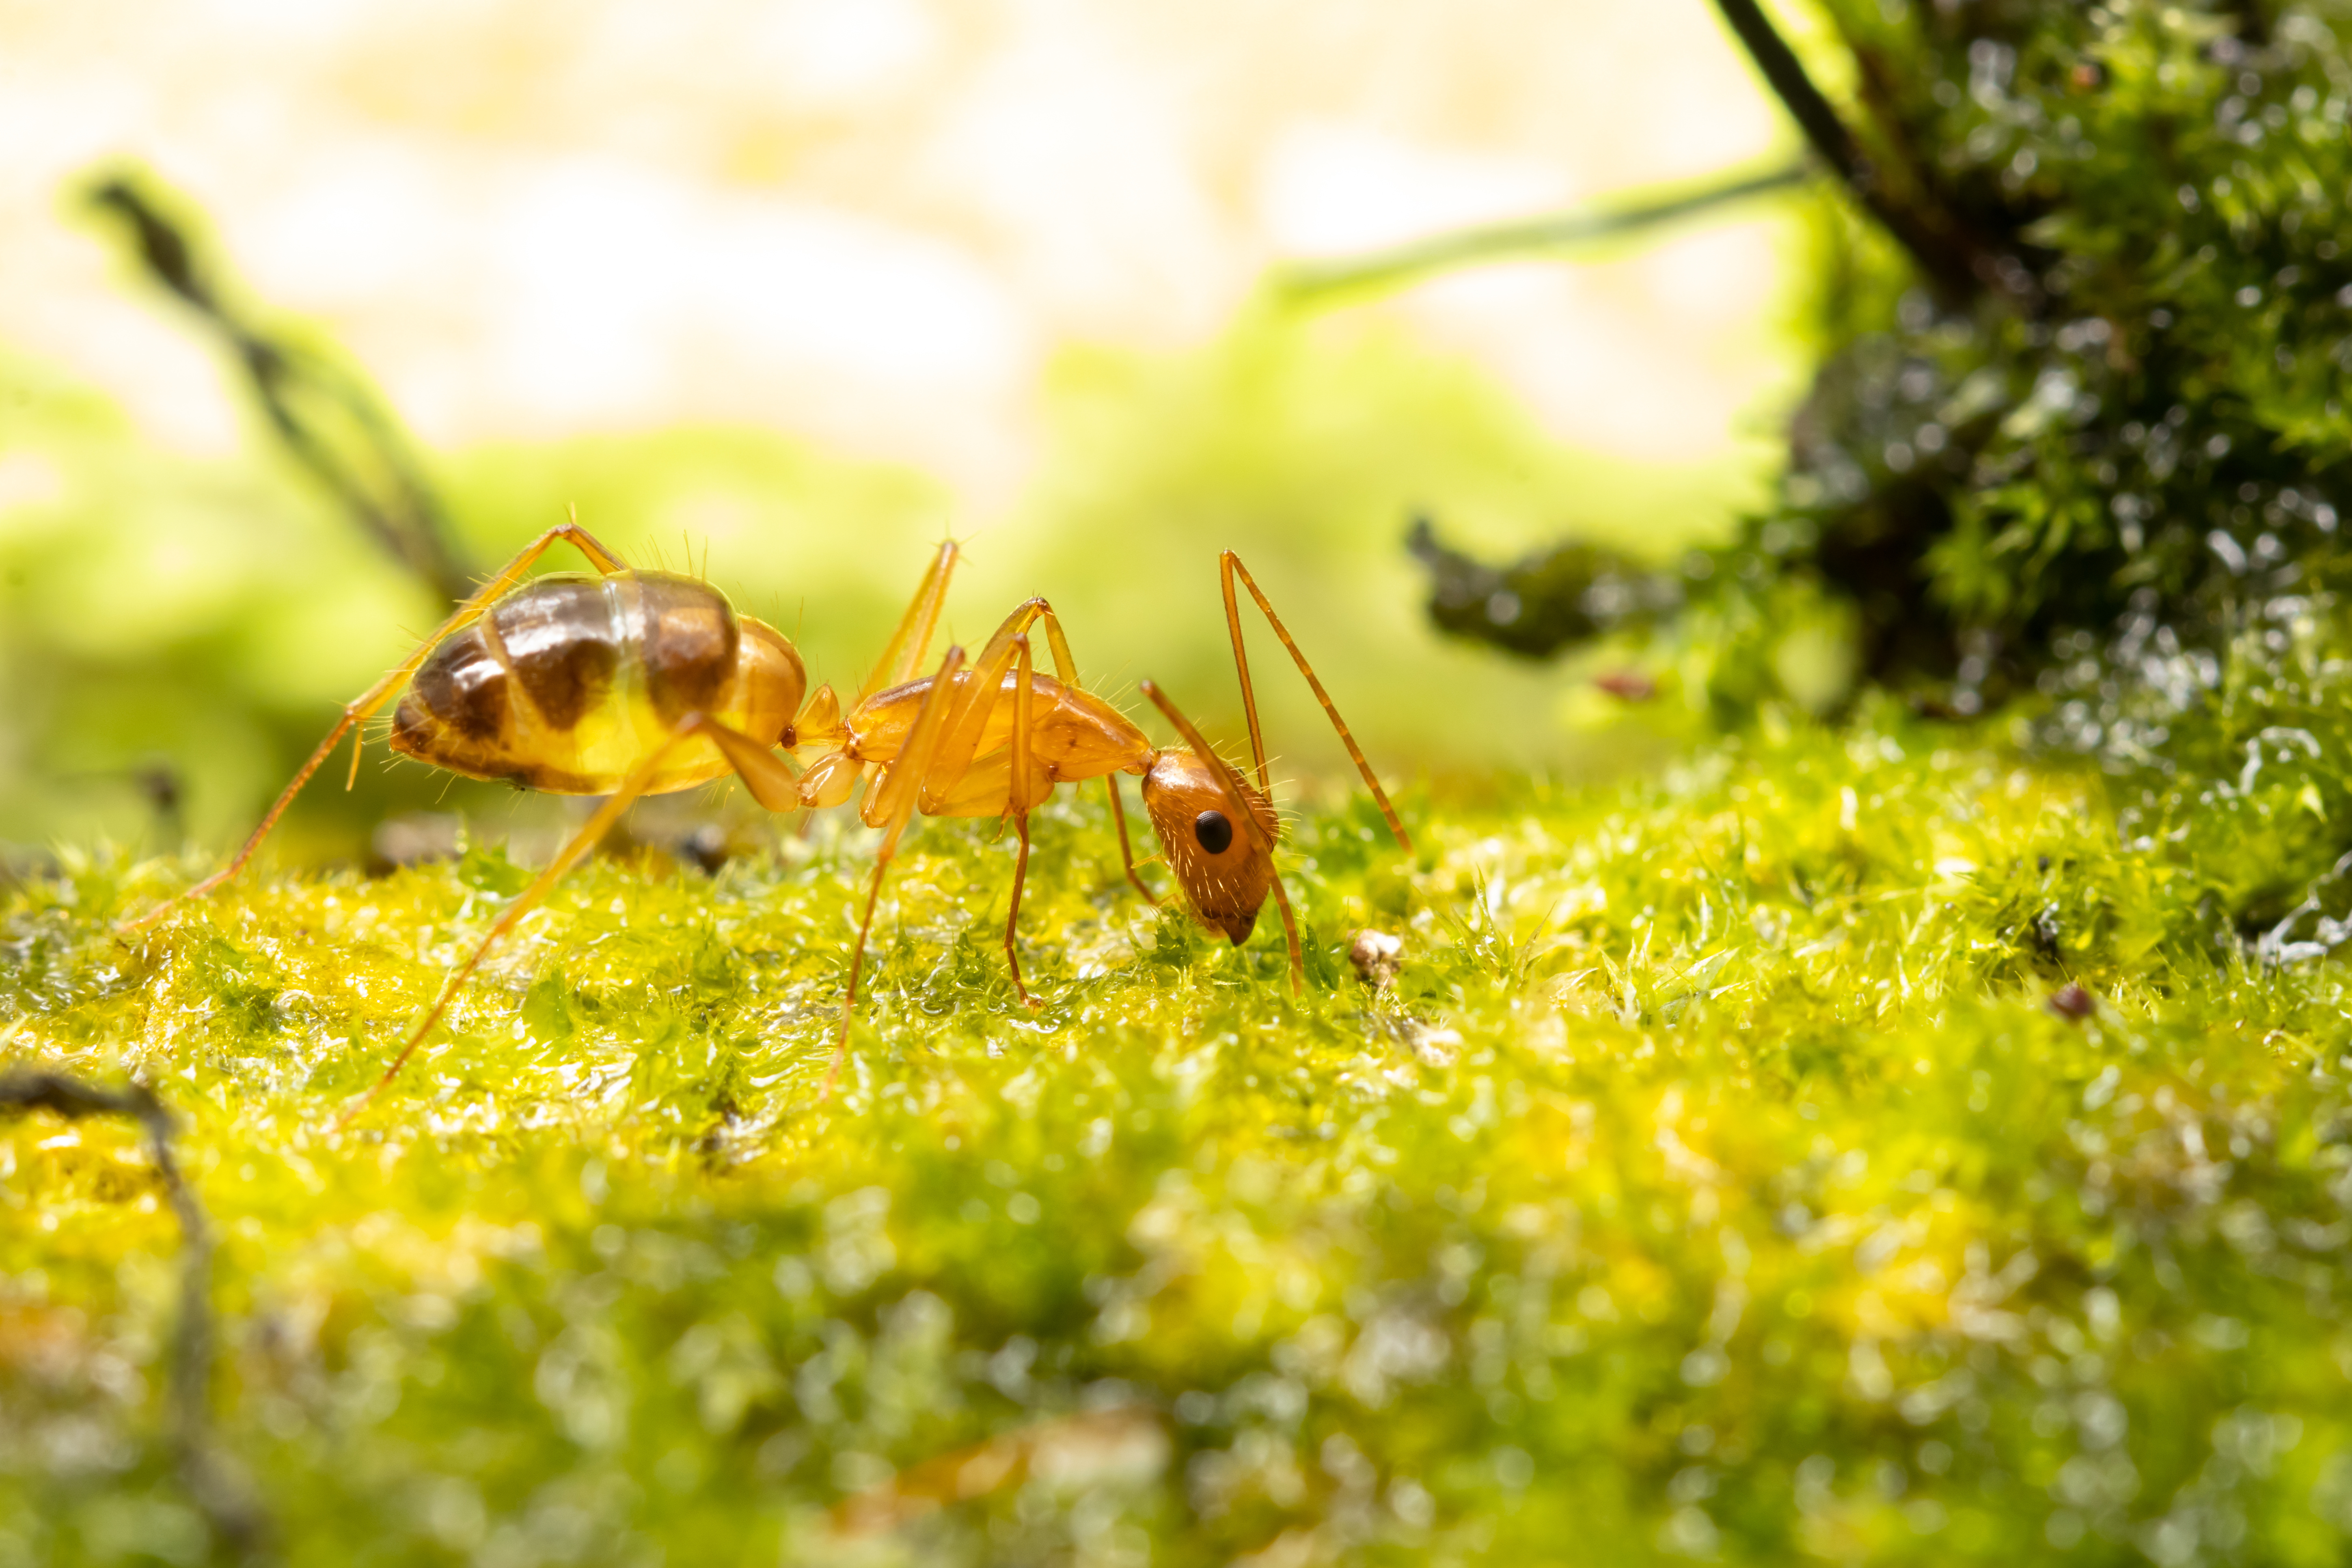 A closeup image of a crazy ant - GGA Pest Management offers extermination services for crazy ants in Hillsboro, TX.